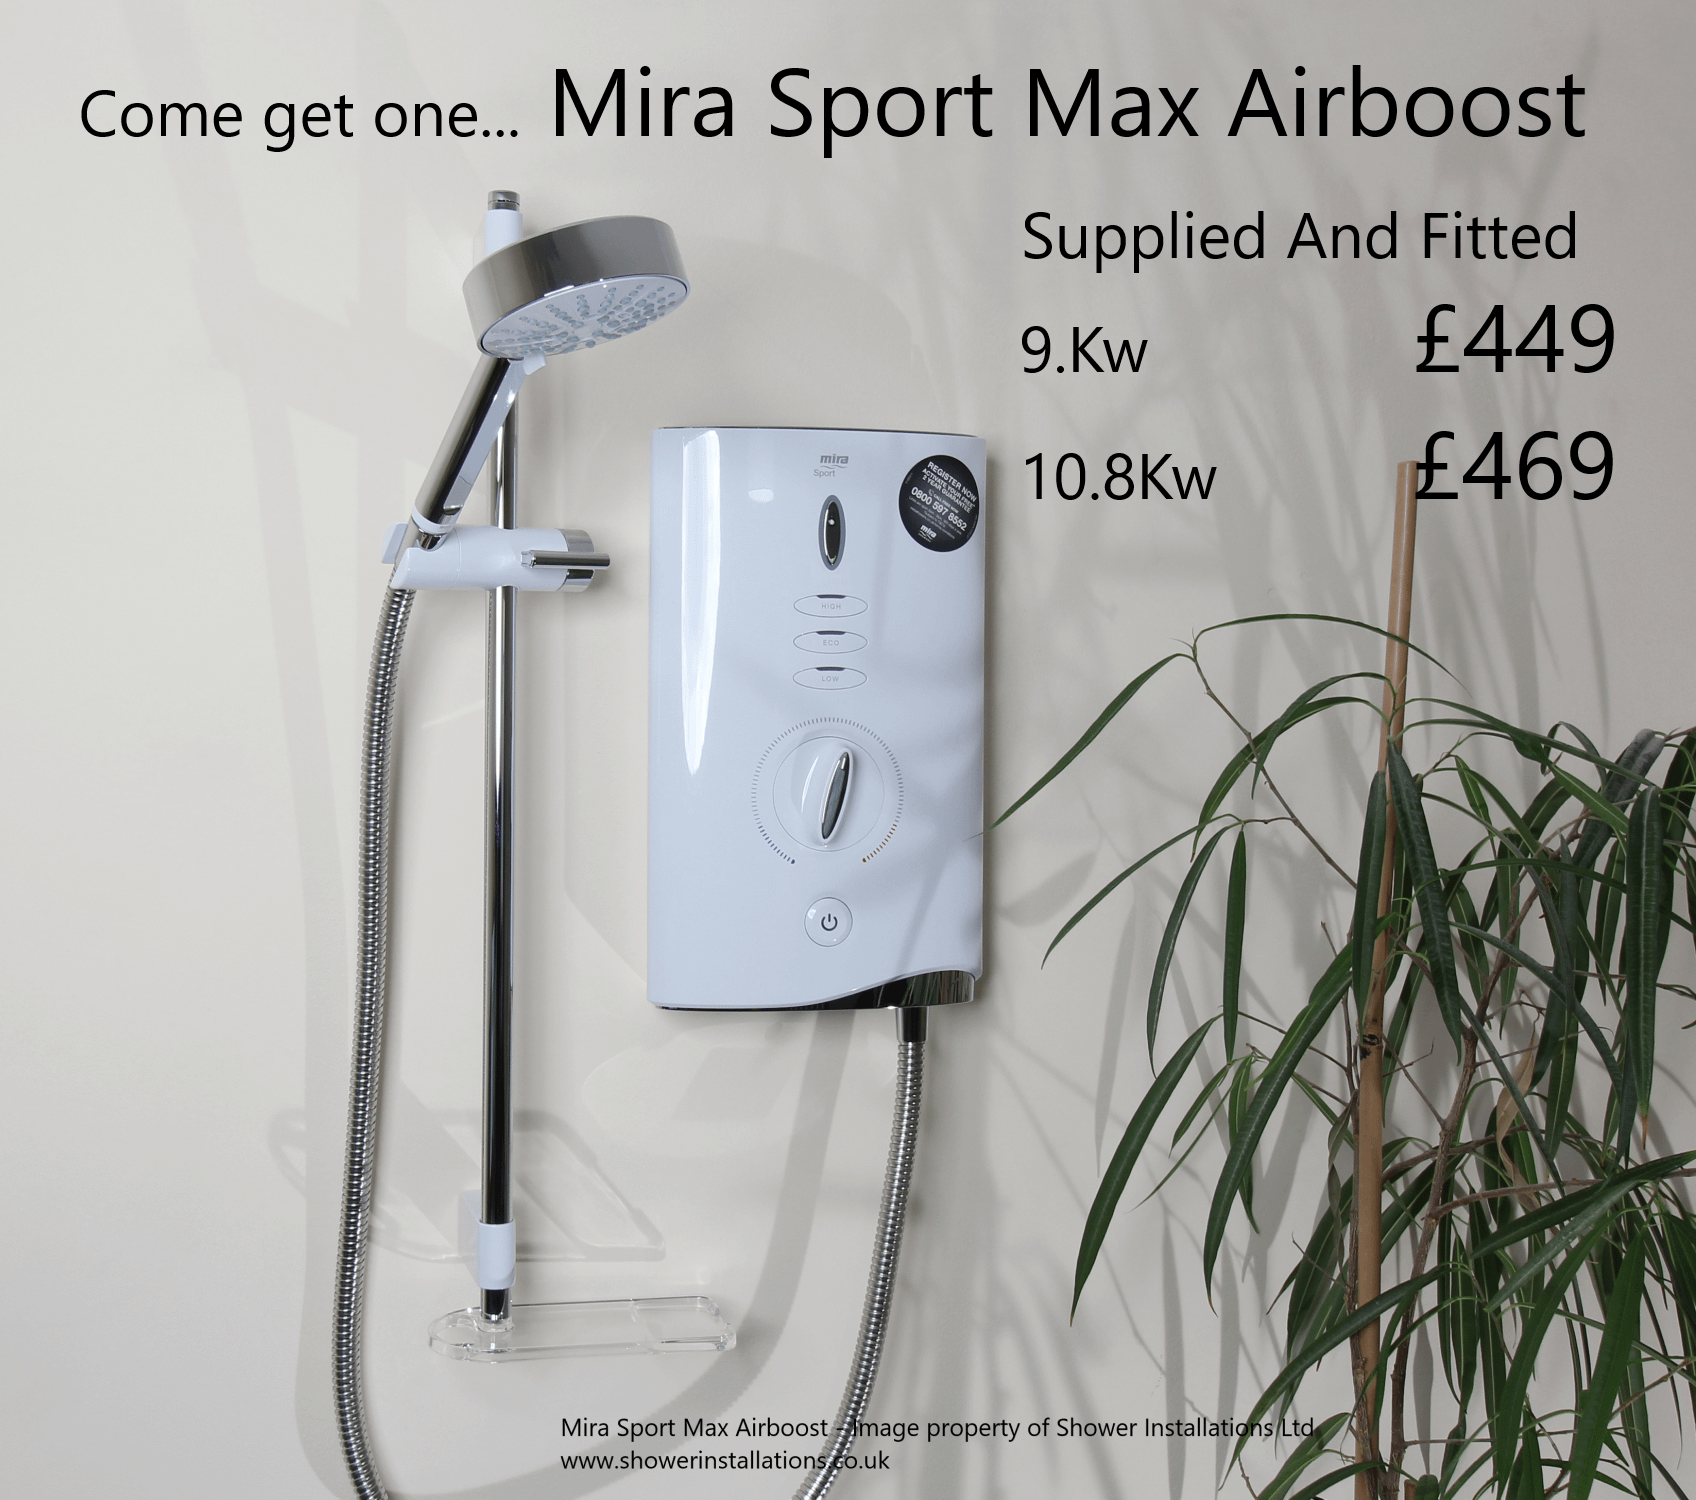 Any Model Mira Sport Supply & Fitted £459